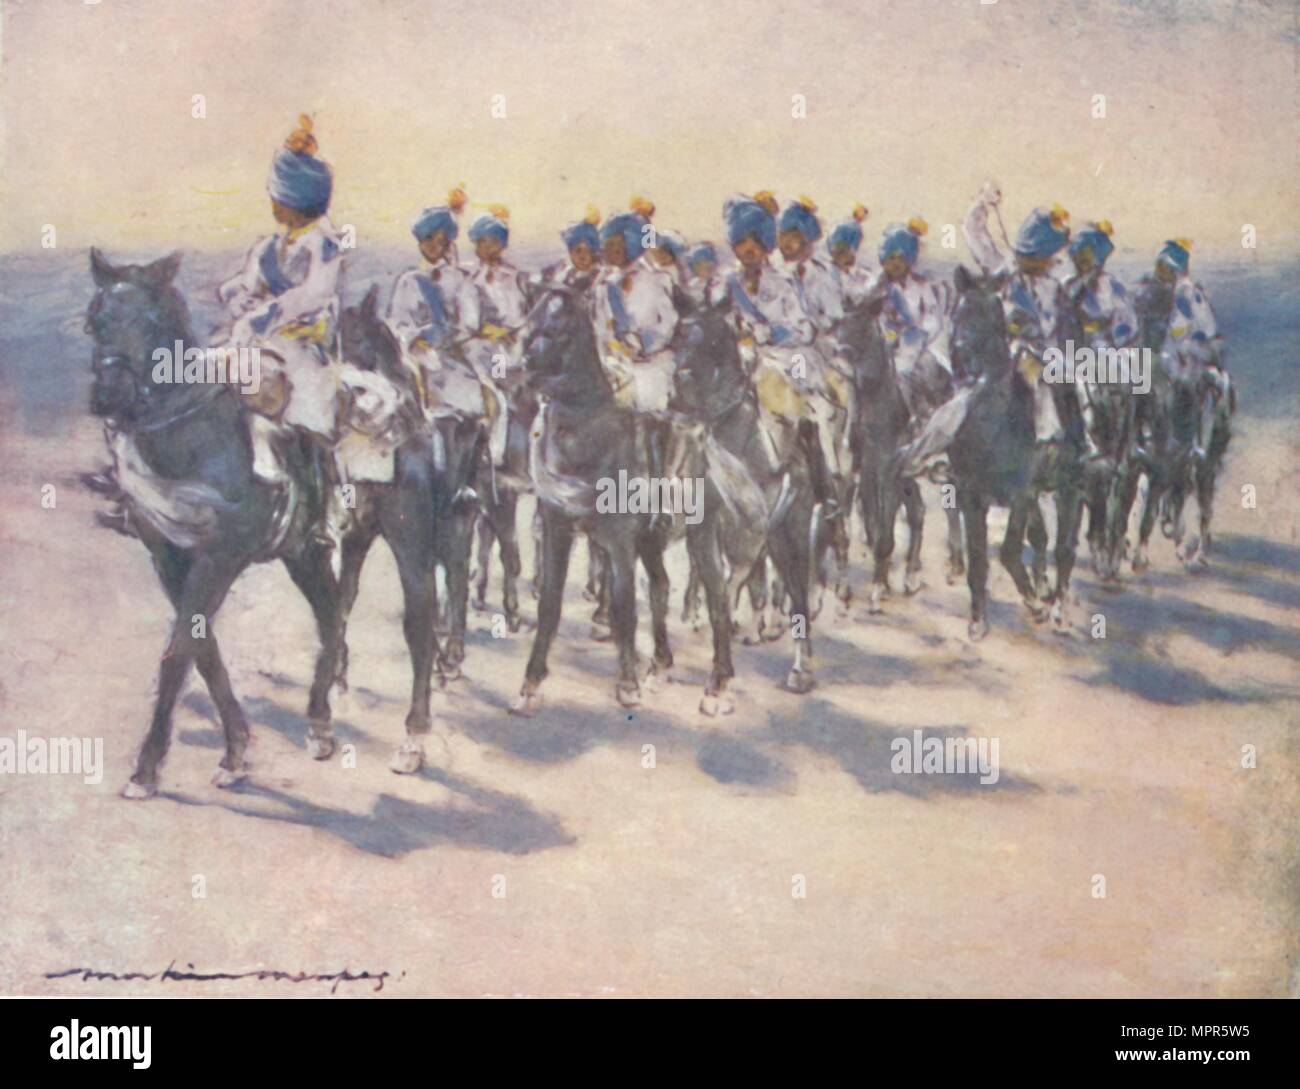 'The Imperial Cadet Corps at the Durbar', 1903. Artist: Mortimer L Menpes. Stock Photo